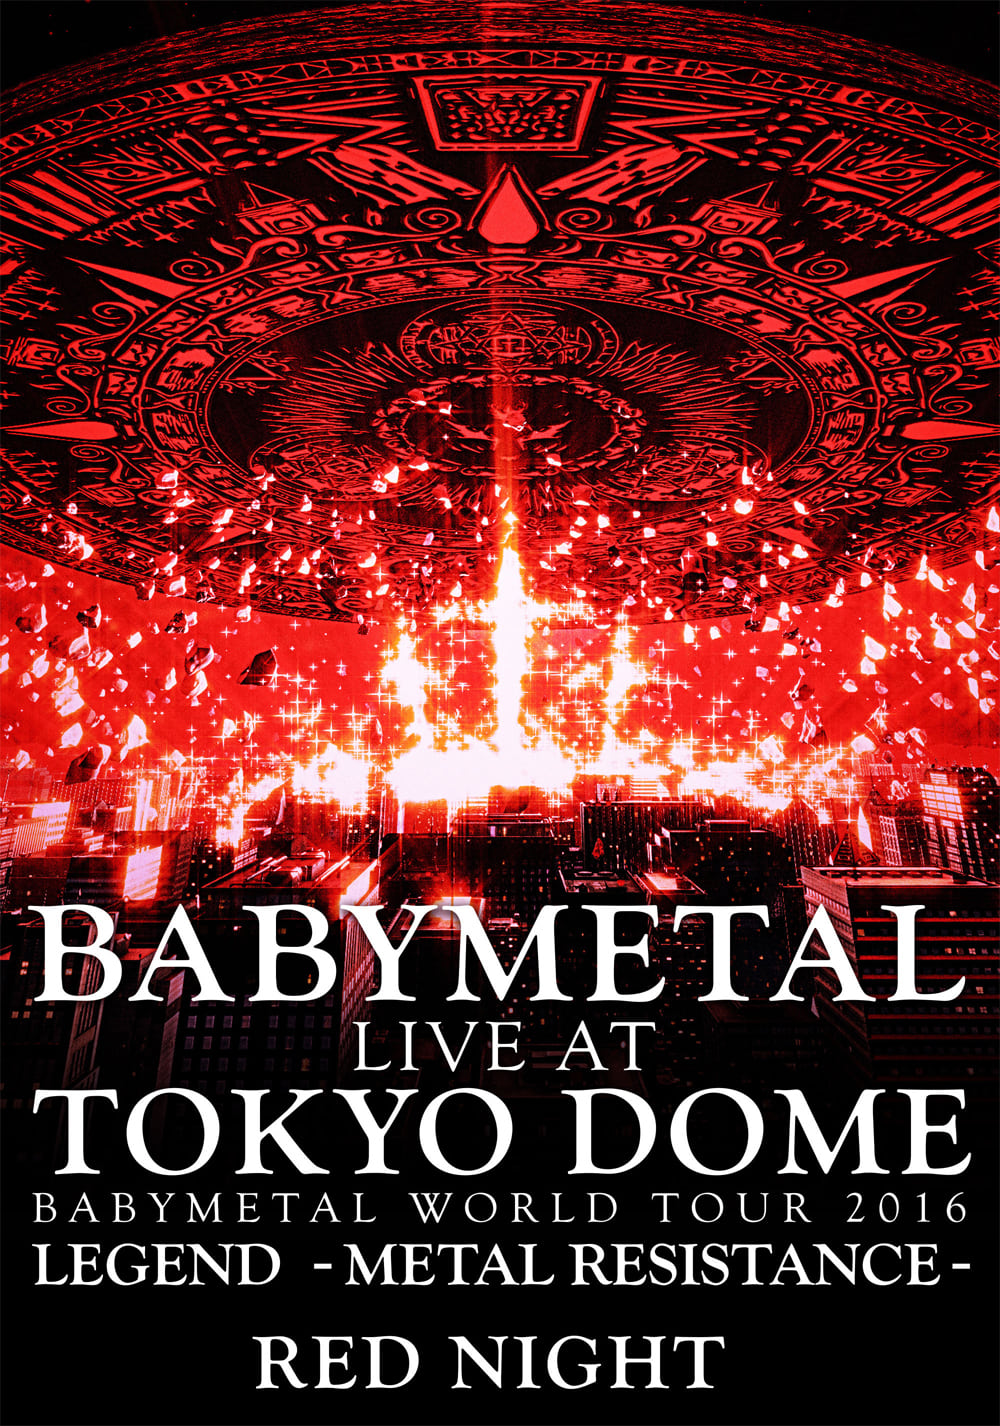 BABYMETAL - Live at Tokyo Dome: Red Night - World Tour 2016